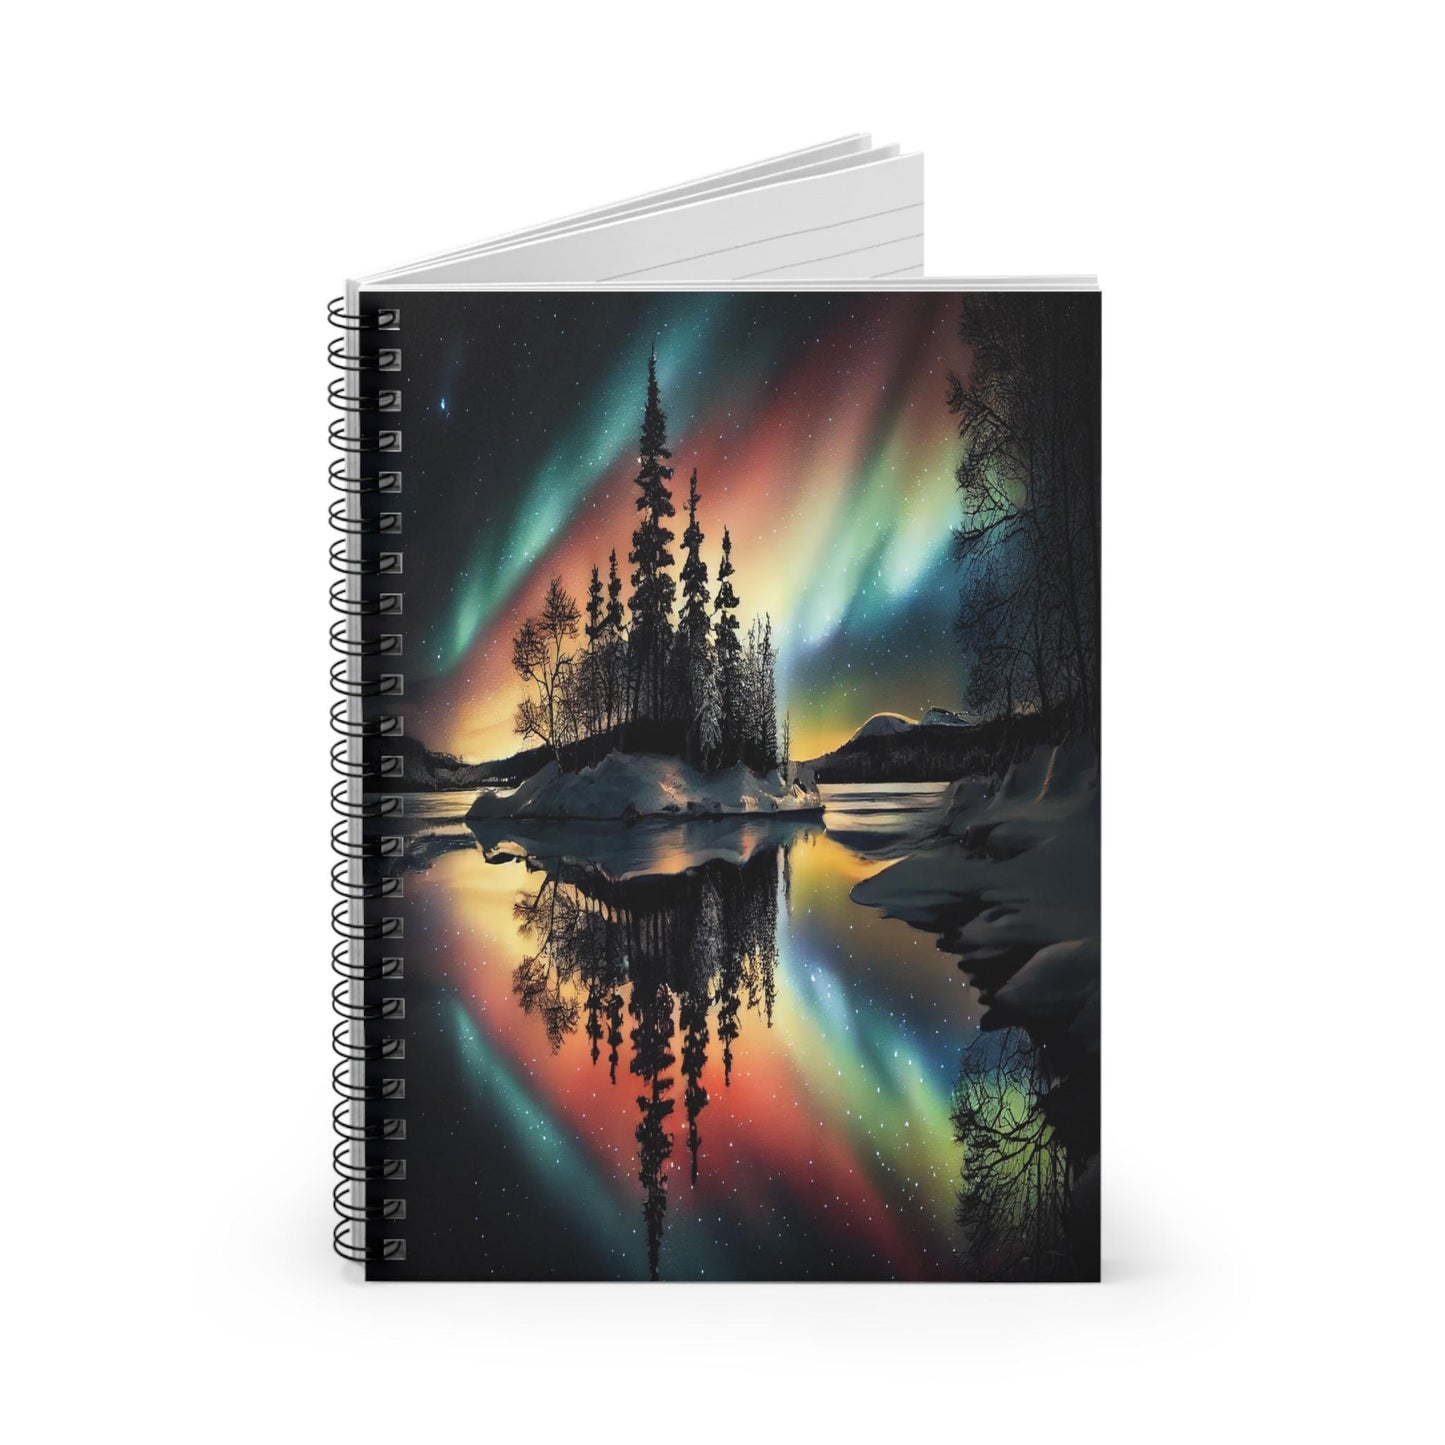 Unique Aurora Borealis Spiral Notebook Ruled Line - Personalized Northern Light View - Stationary Accessories - Perfect Aurora Lovers Gift 39